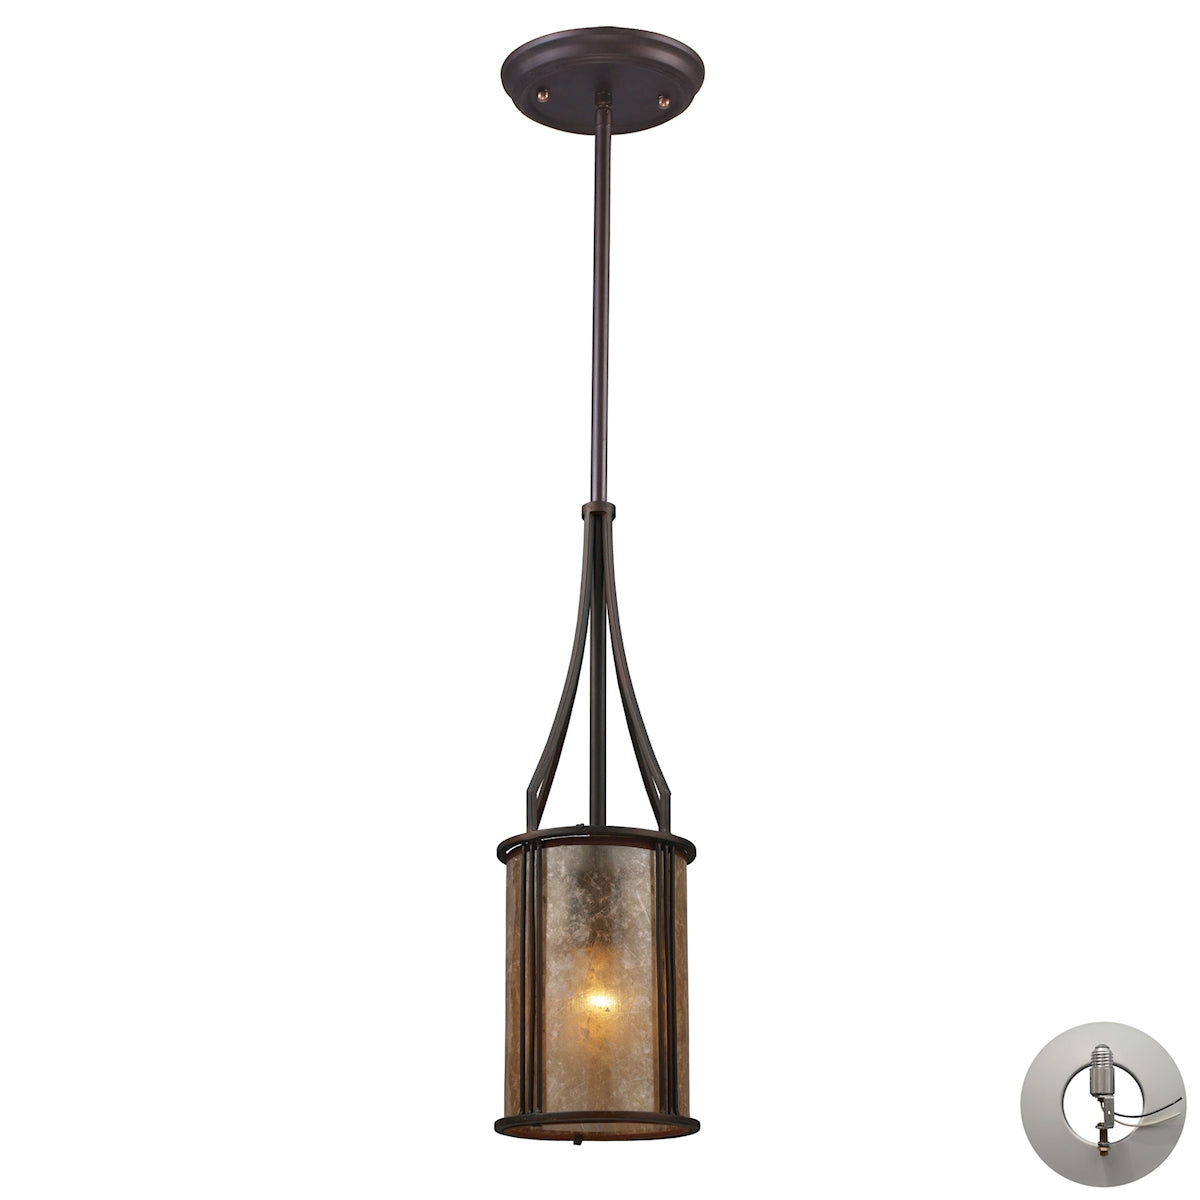 ELK Lighting 15033/1-LA Barringer 1-Light Mini Pendant in Aged Bronze with Tan Mica Shade - Includes Adapter Kit